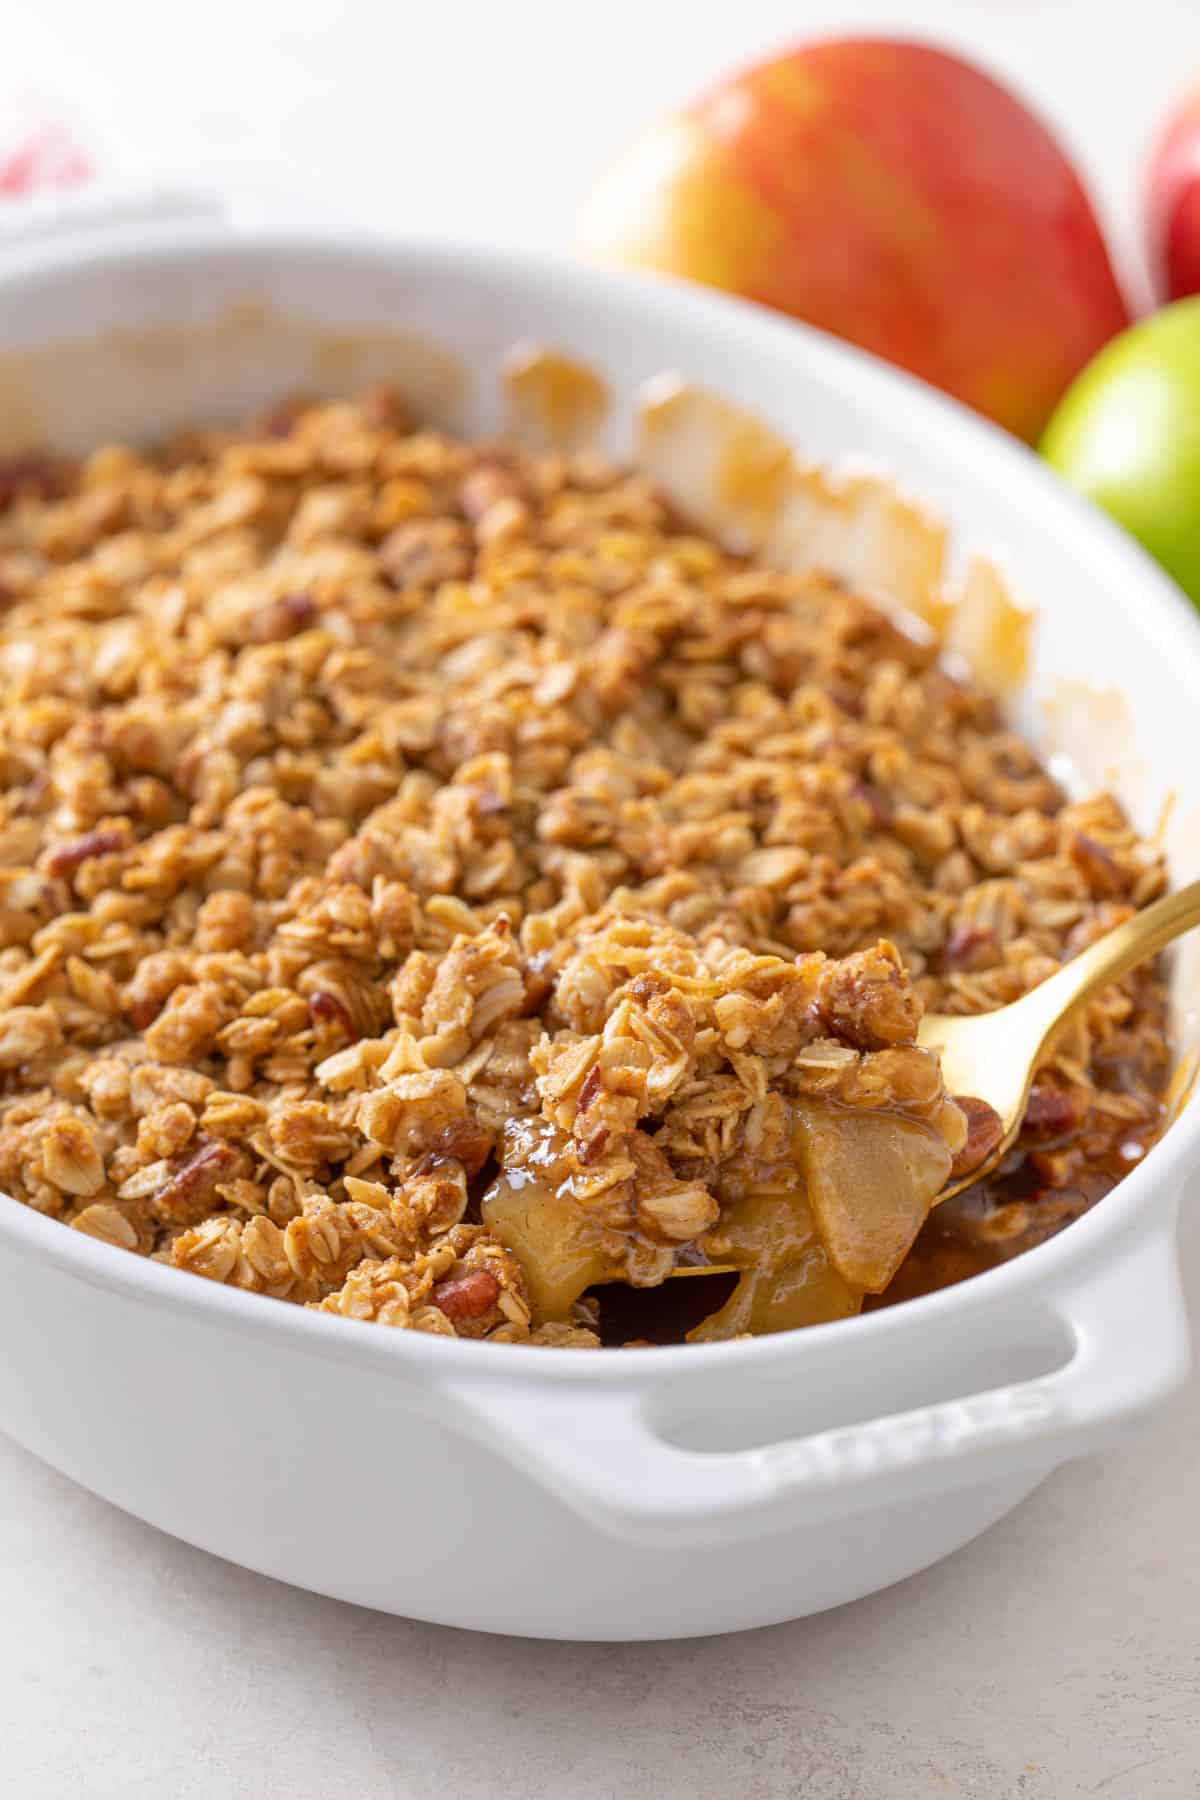 A spoon scooping apple crisp from a white baking dish.